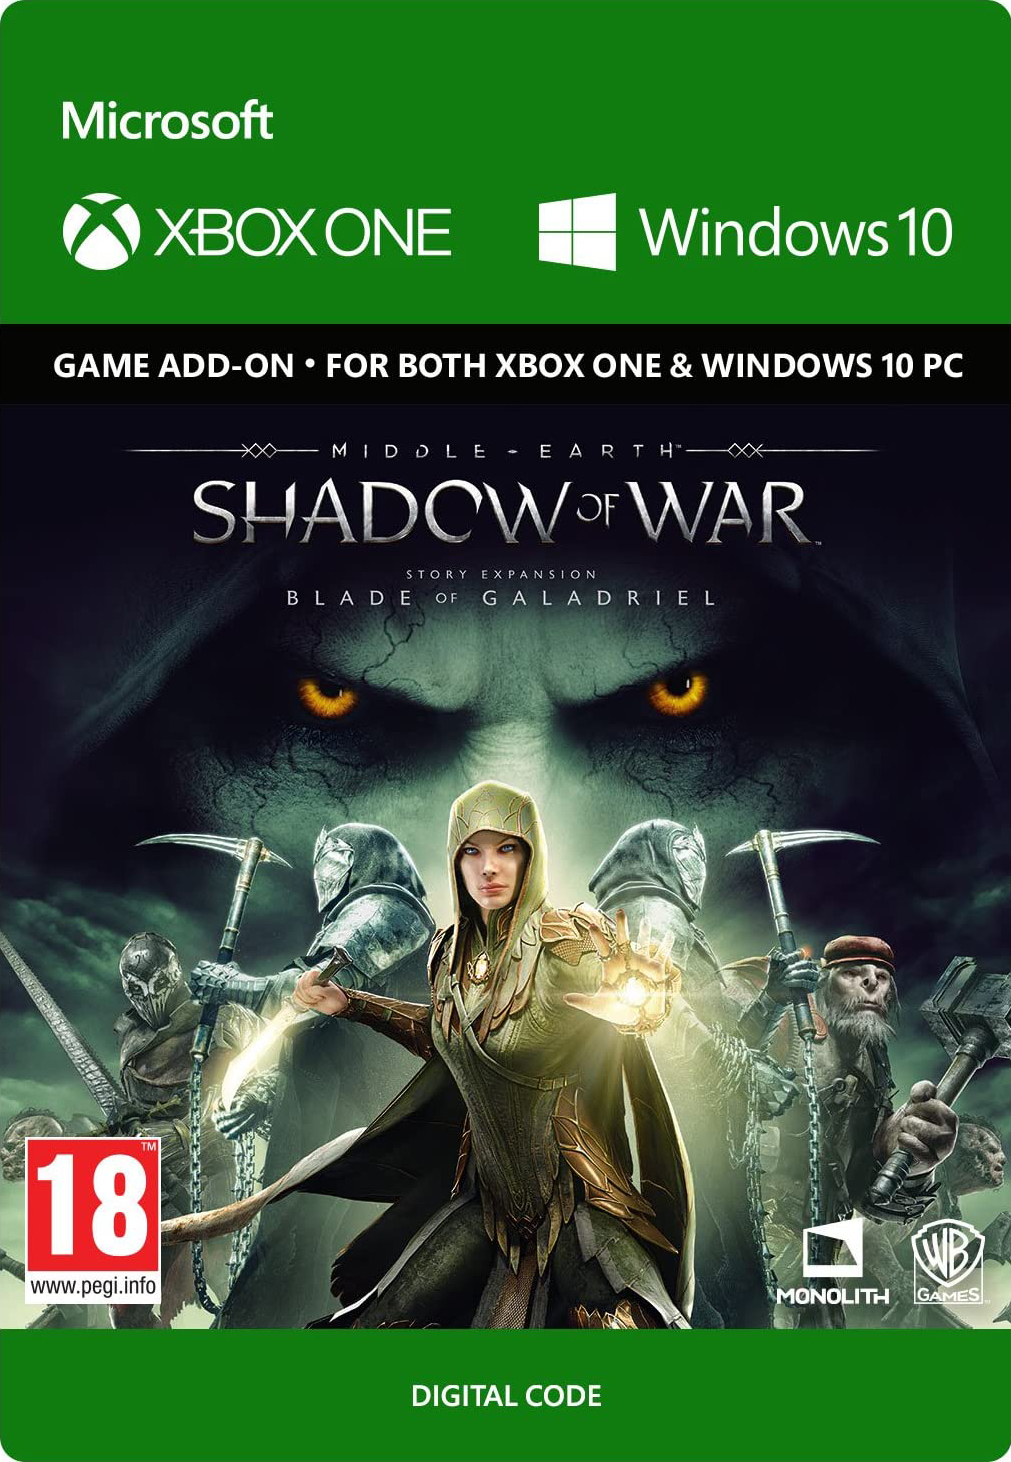 средиземье: тени войны (middle-earth: shadow of war) the blade of galadriel story expansion. дополнение [xbox one/win10